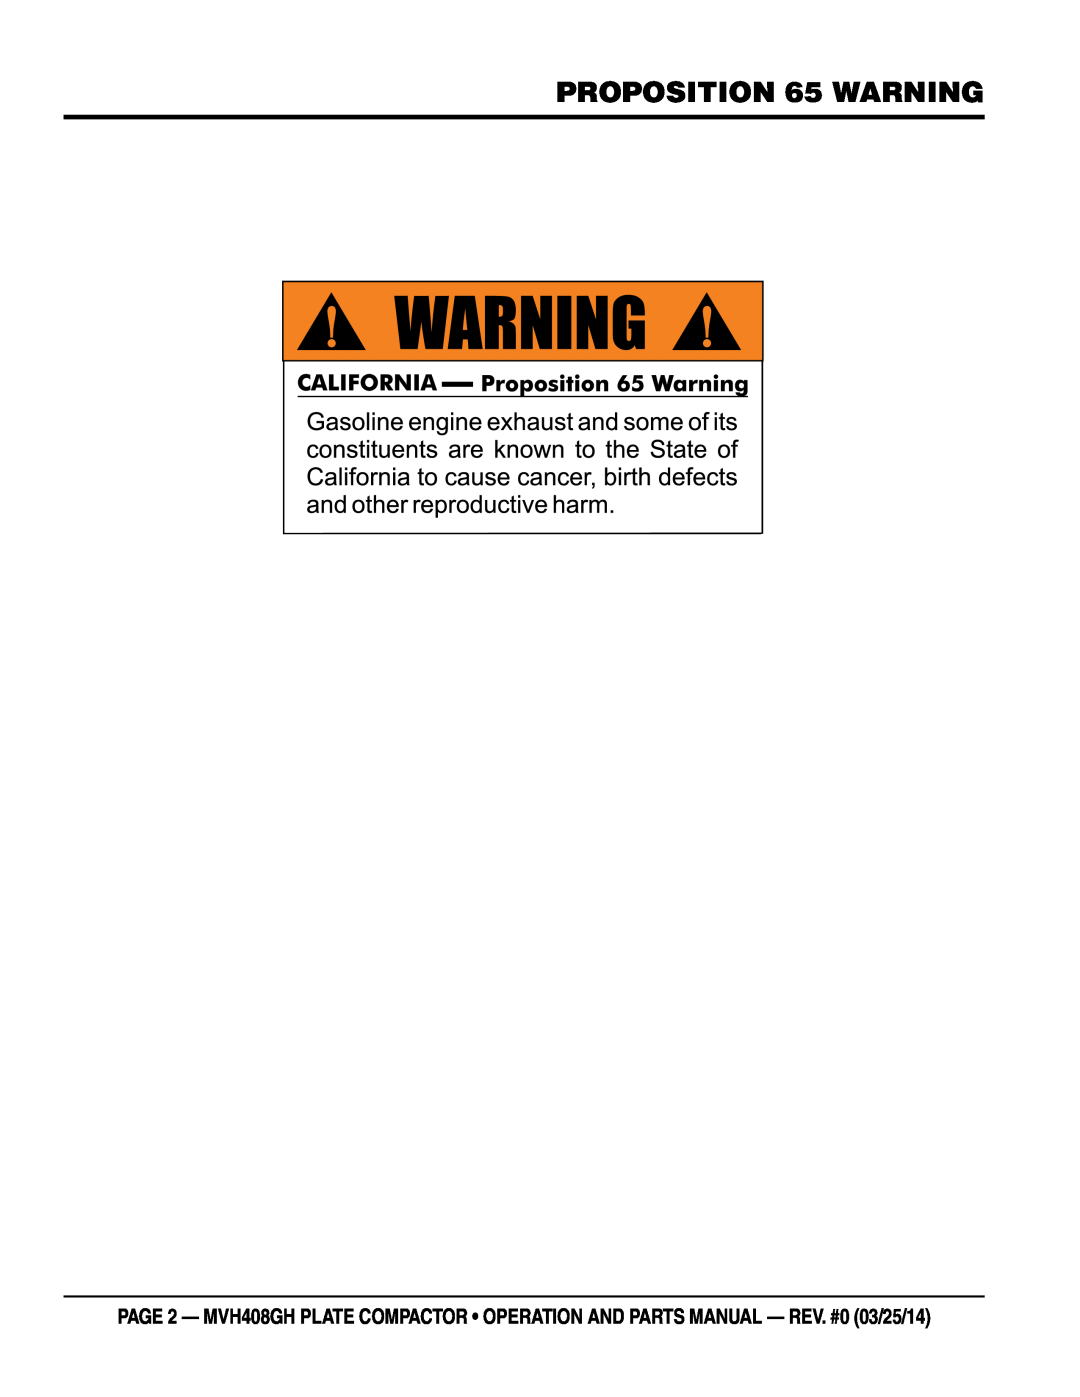 Multiquip MVH408GH manual PROPOSITION 65 WARNING 